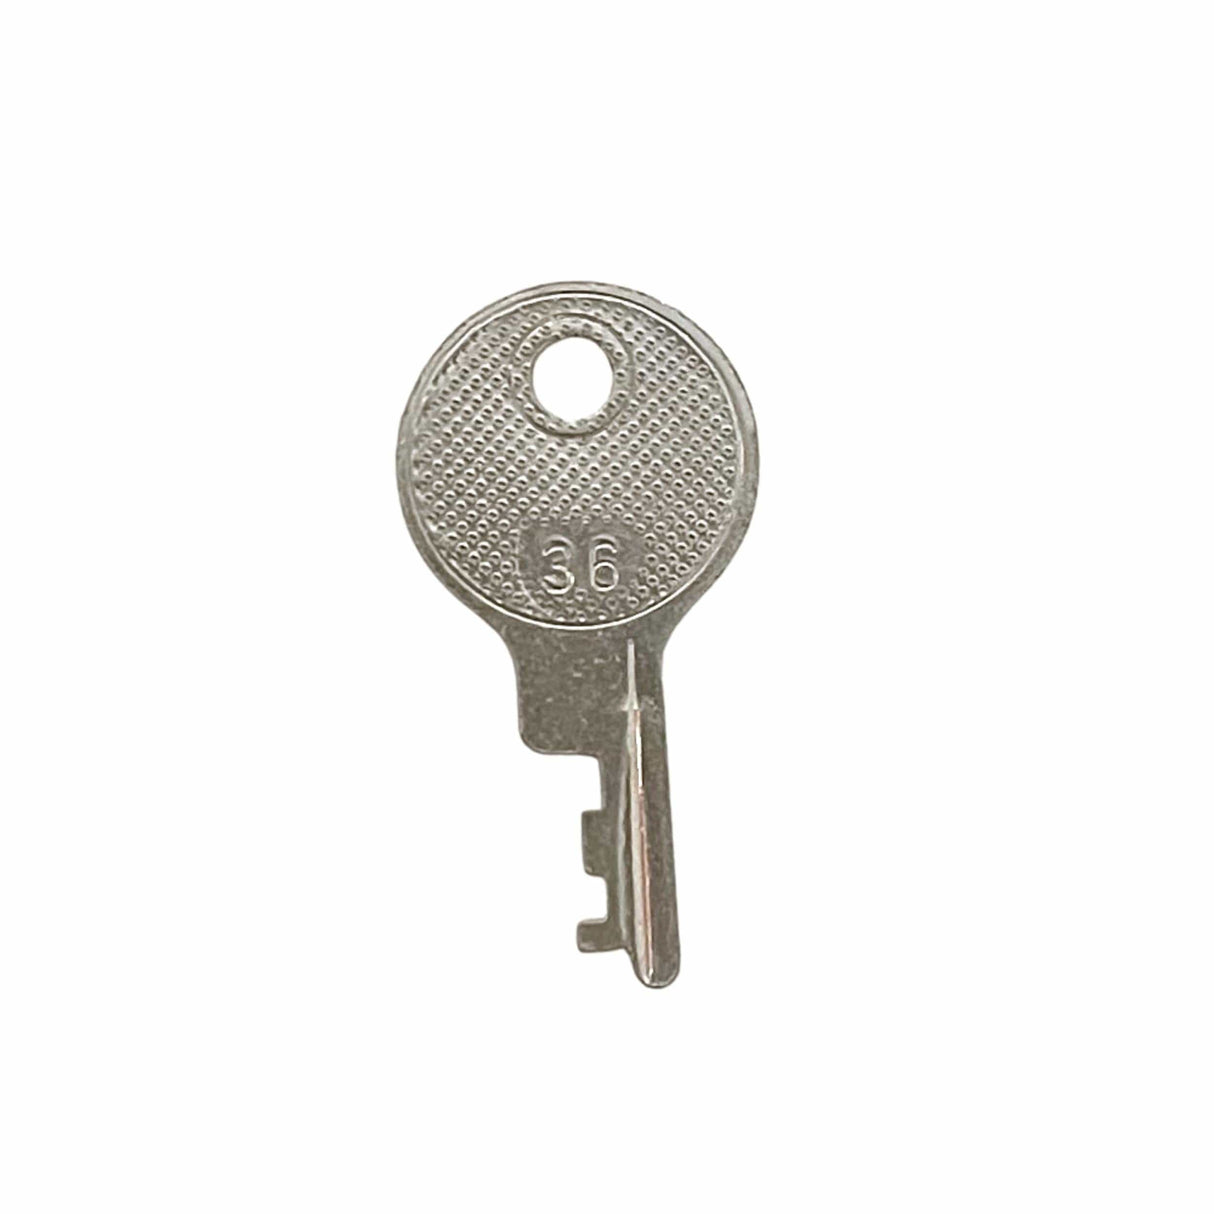 Excelsior No. 36 Lock Replacement Key, 5PK, #EX-36K – Weaver Leather Supply